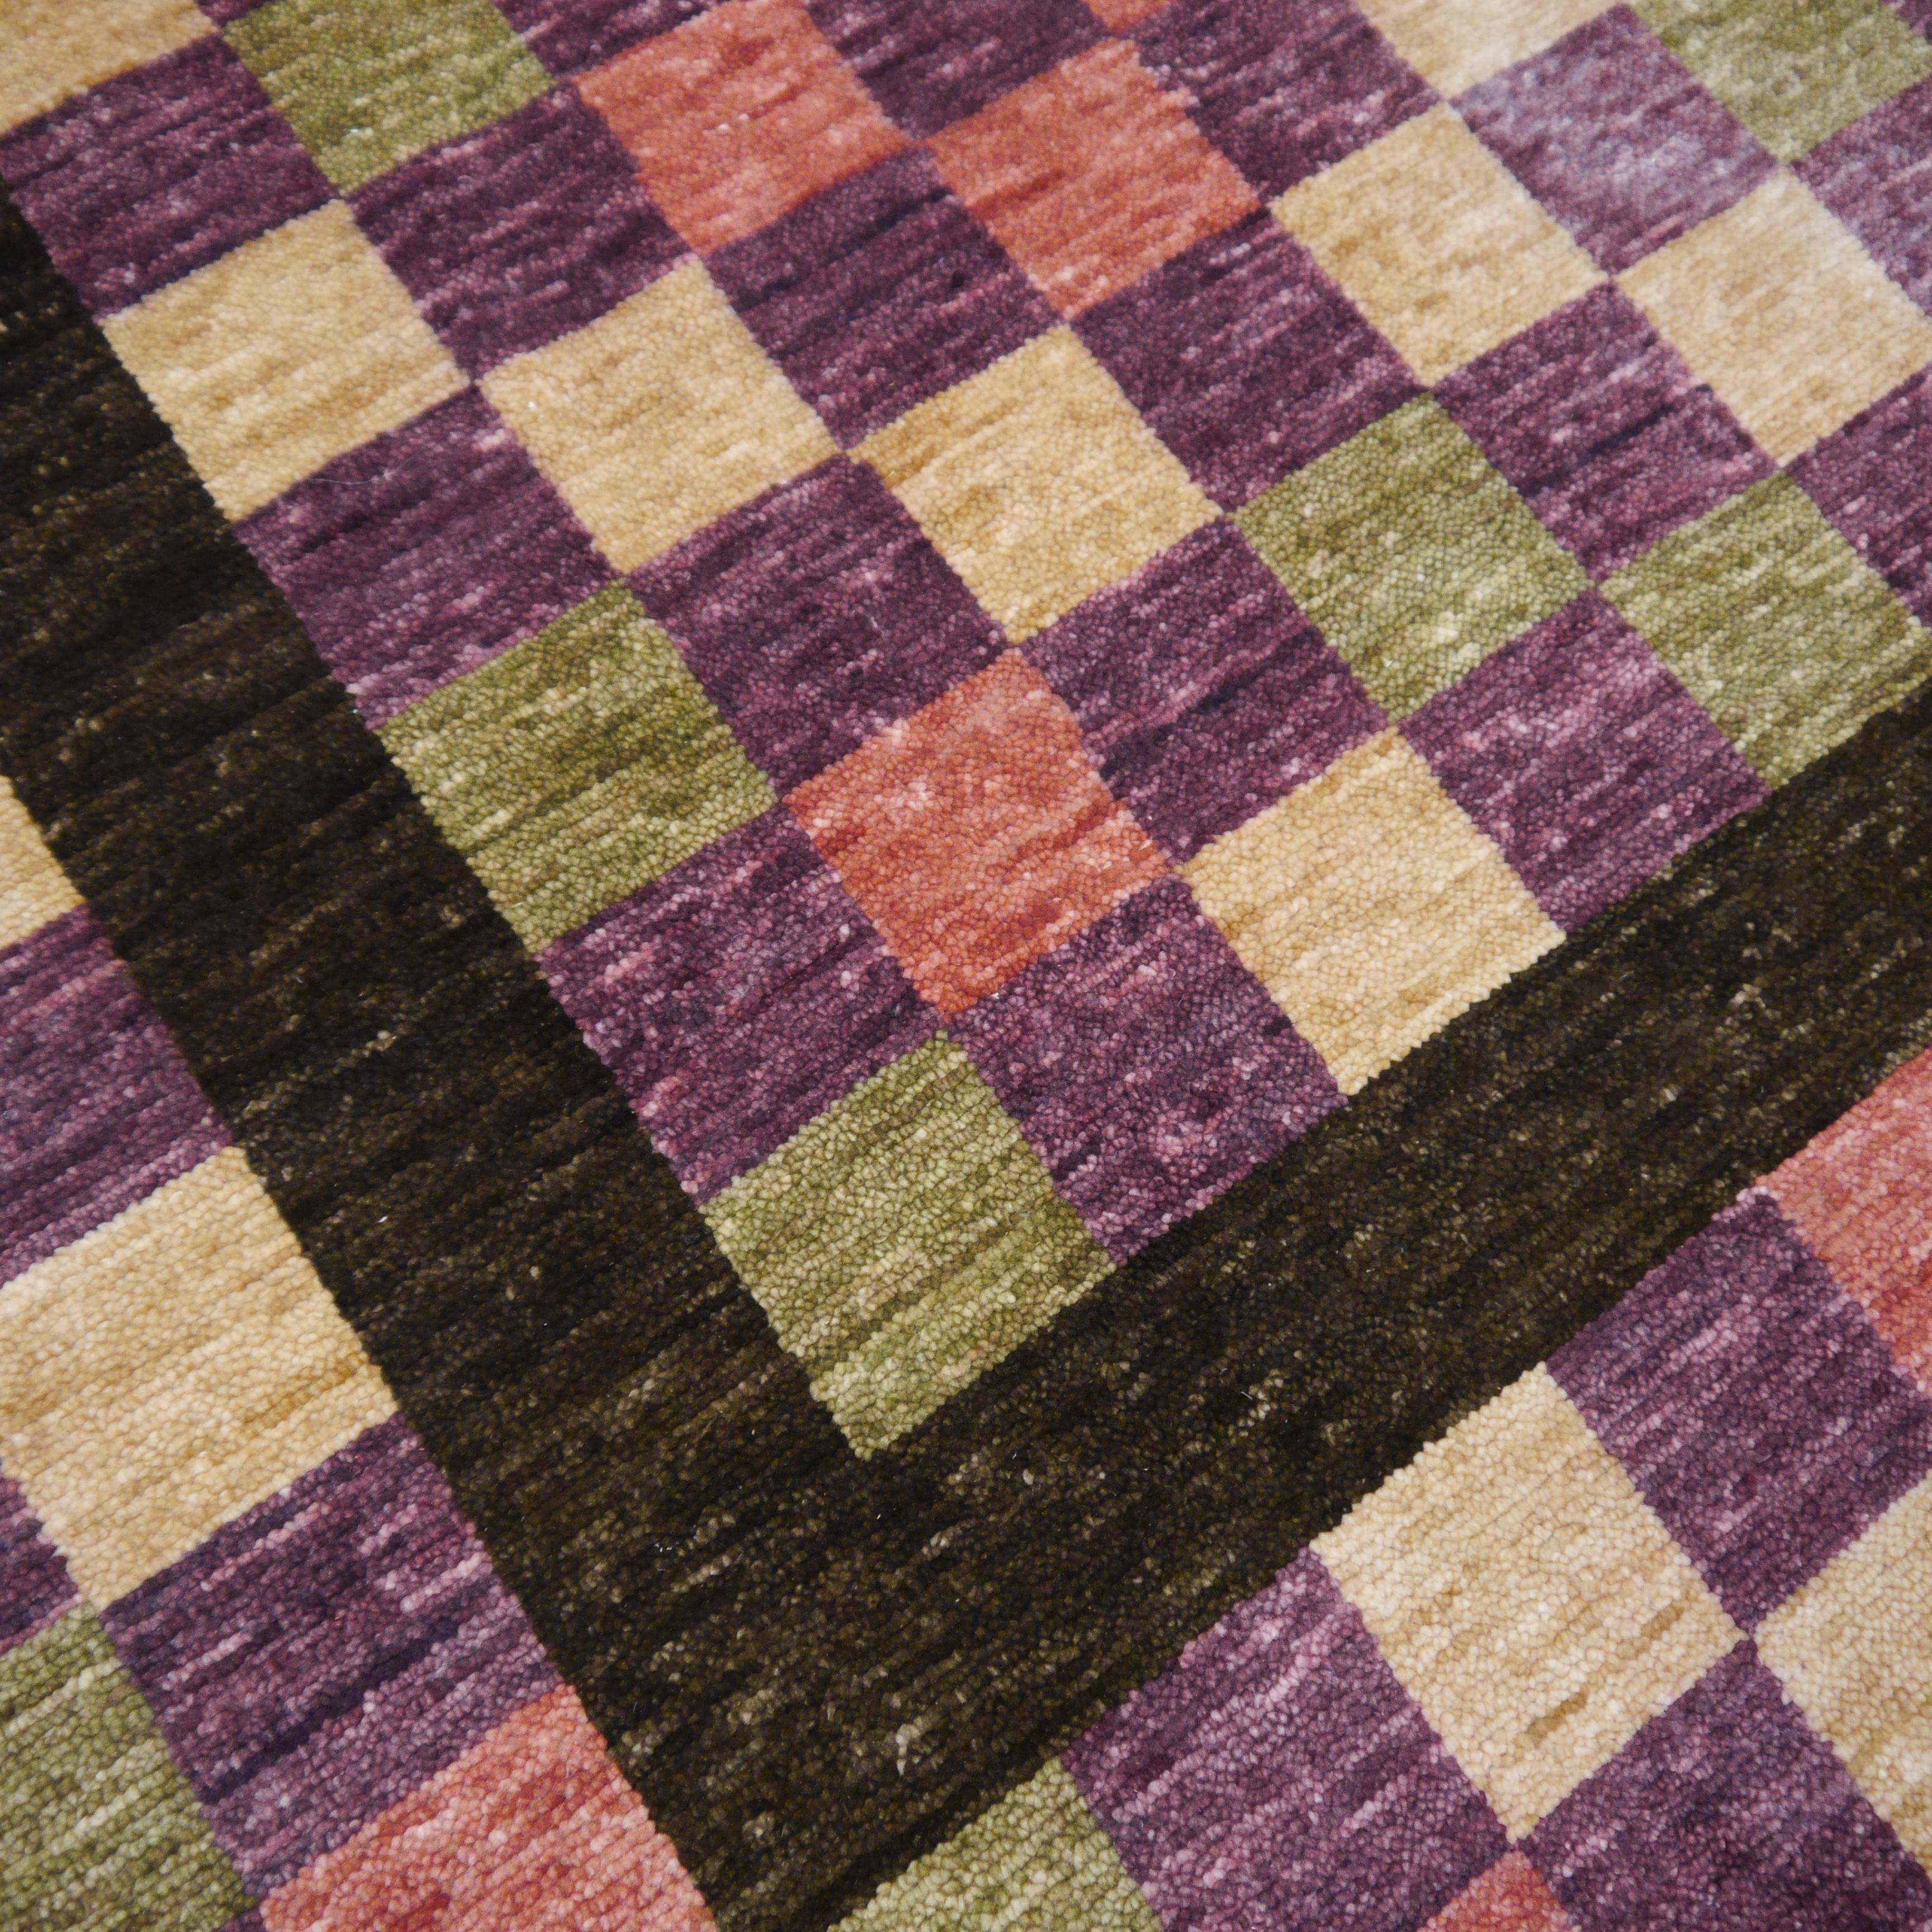 Modern Cubist Style Rug hand knotted wool carpet cirva 9 x 9 ft Coral Lilac  In Excellent Condition For Sale In Lohr, Bavaria, DE